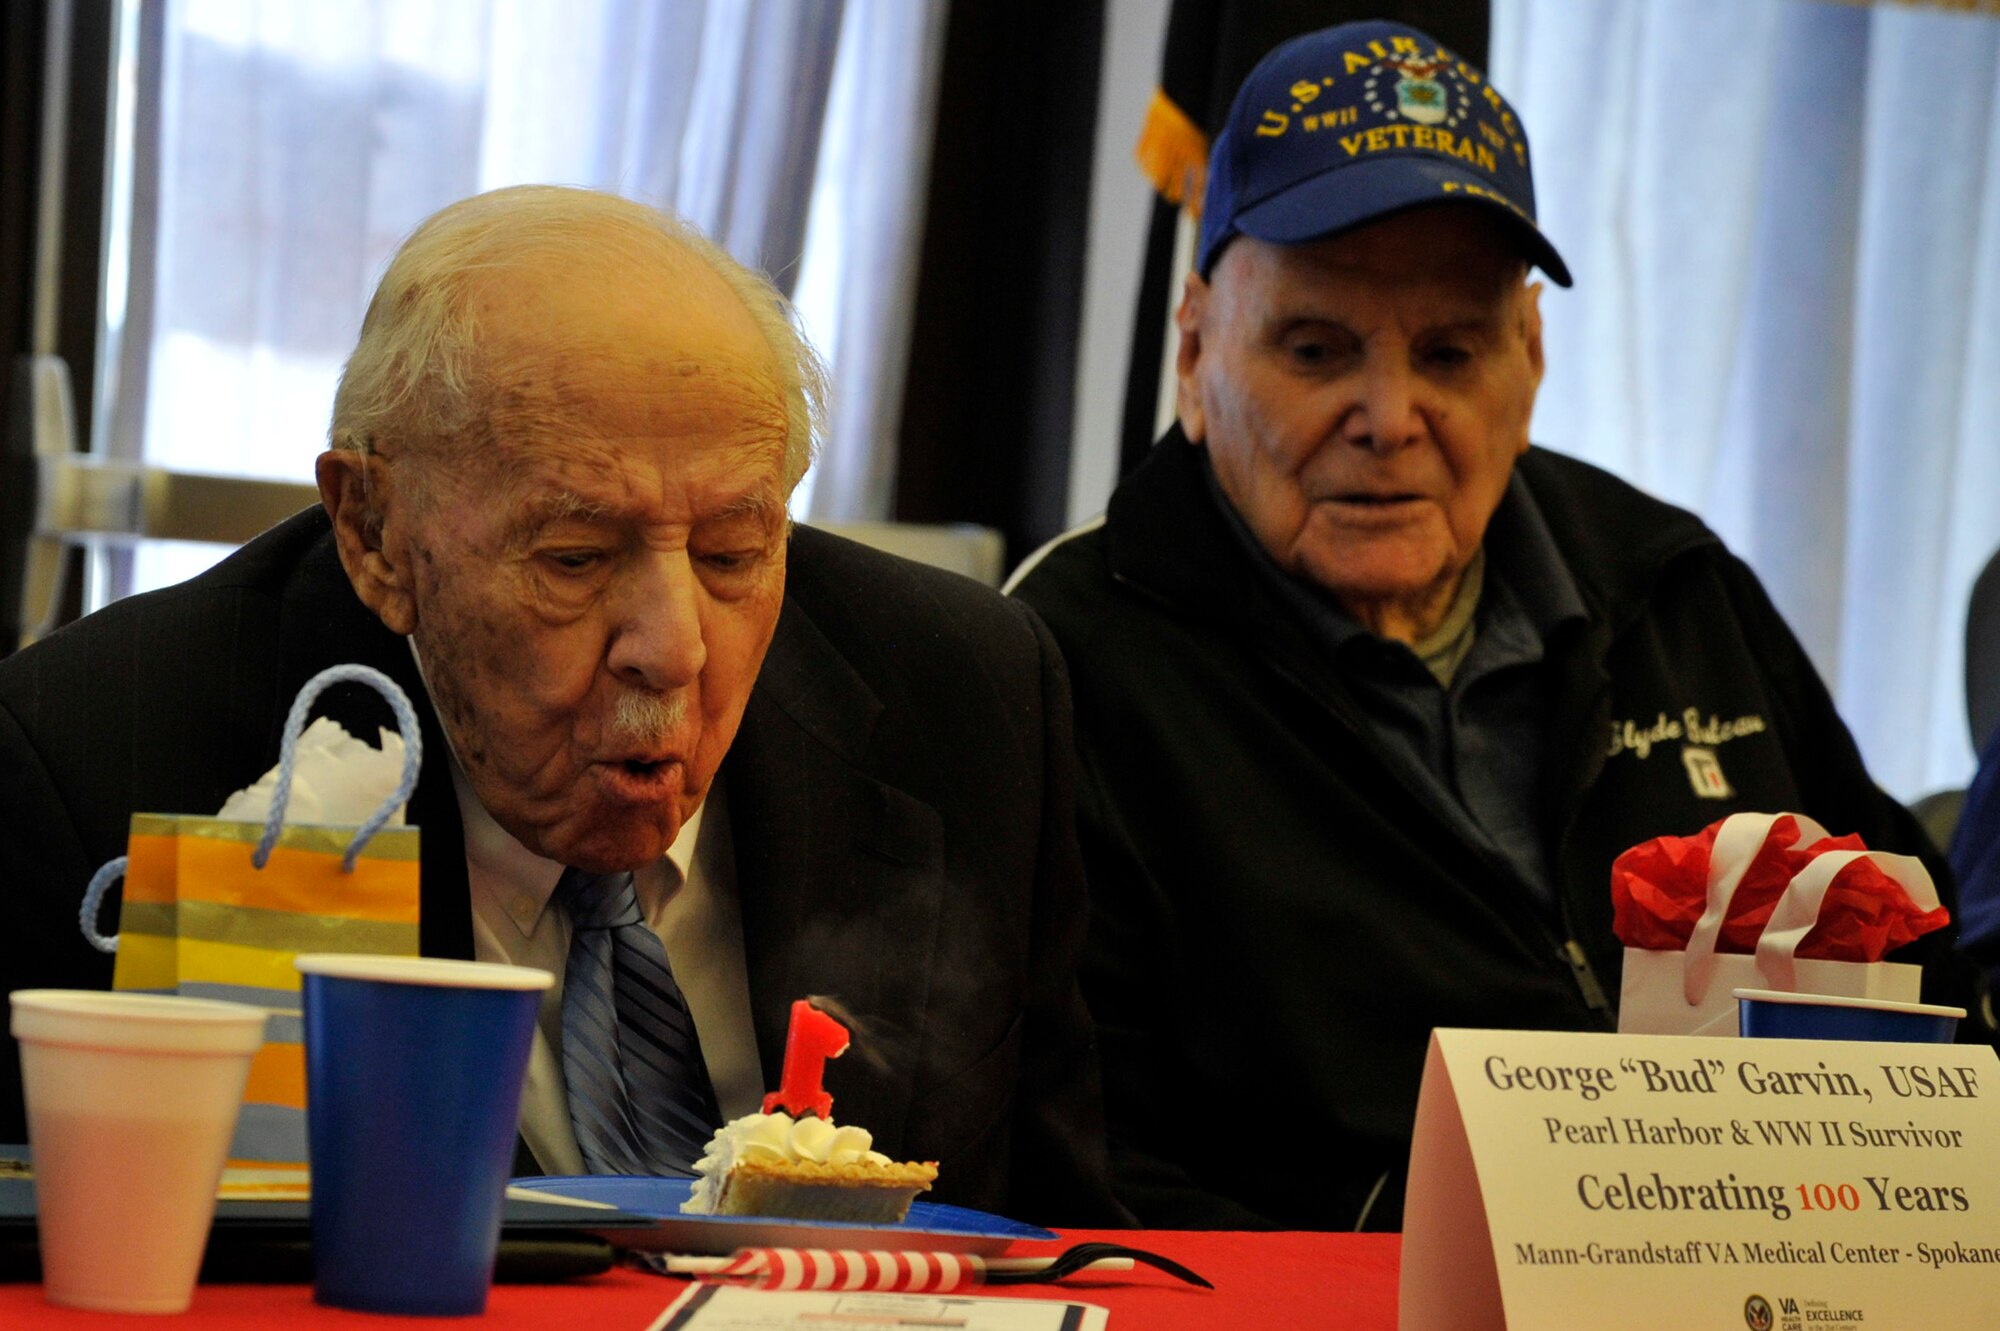 George “Bud” Garvin, veteran of the U.S. Army Air Corps and Air Force, blows out his birthday candle during his birthday celebration at the Spokane VA Medical Center Jan. 21, 2015, Spokane, Wash. The Spokane VAMC hosted his 100th birthday celebration and honored him for his military service during; Pearl Harbor, D-Day invasion at Omaha beach and the Battle of the Bulge during World War II. (U.S. Air Force photo/Airman 1st Class Nicolo J. Daniello)